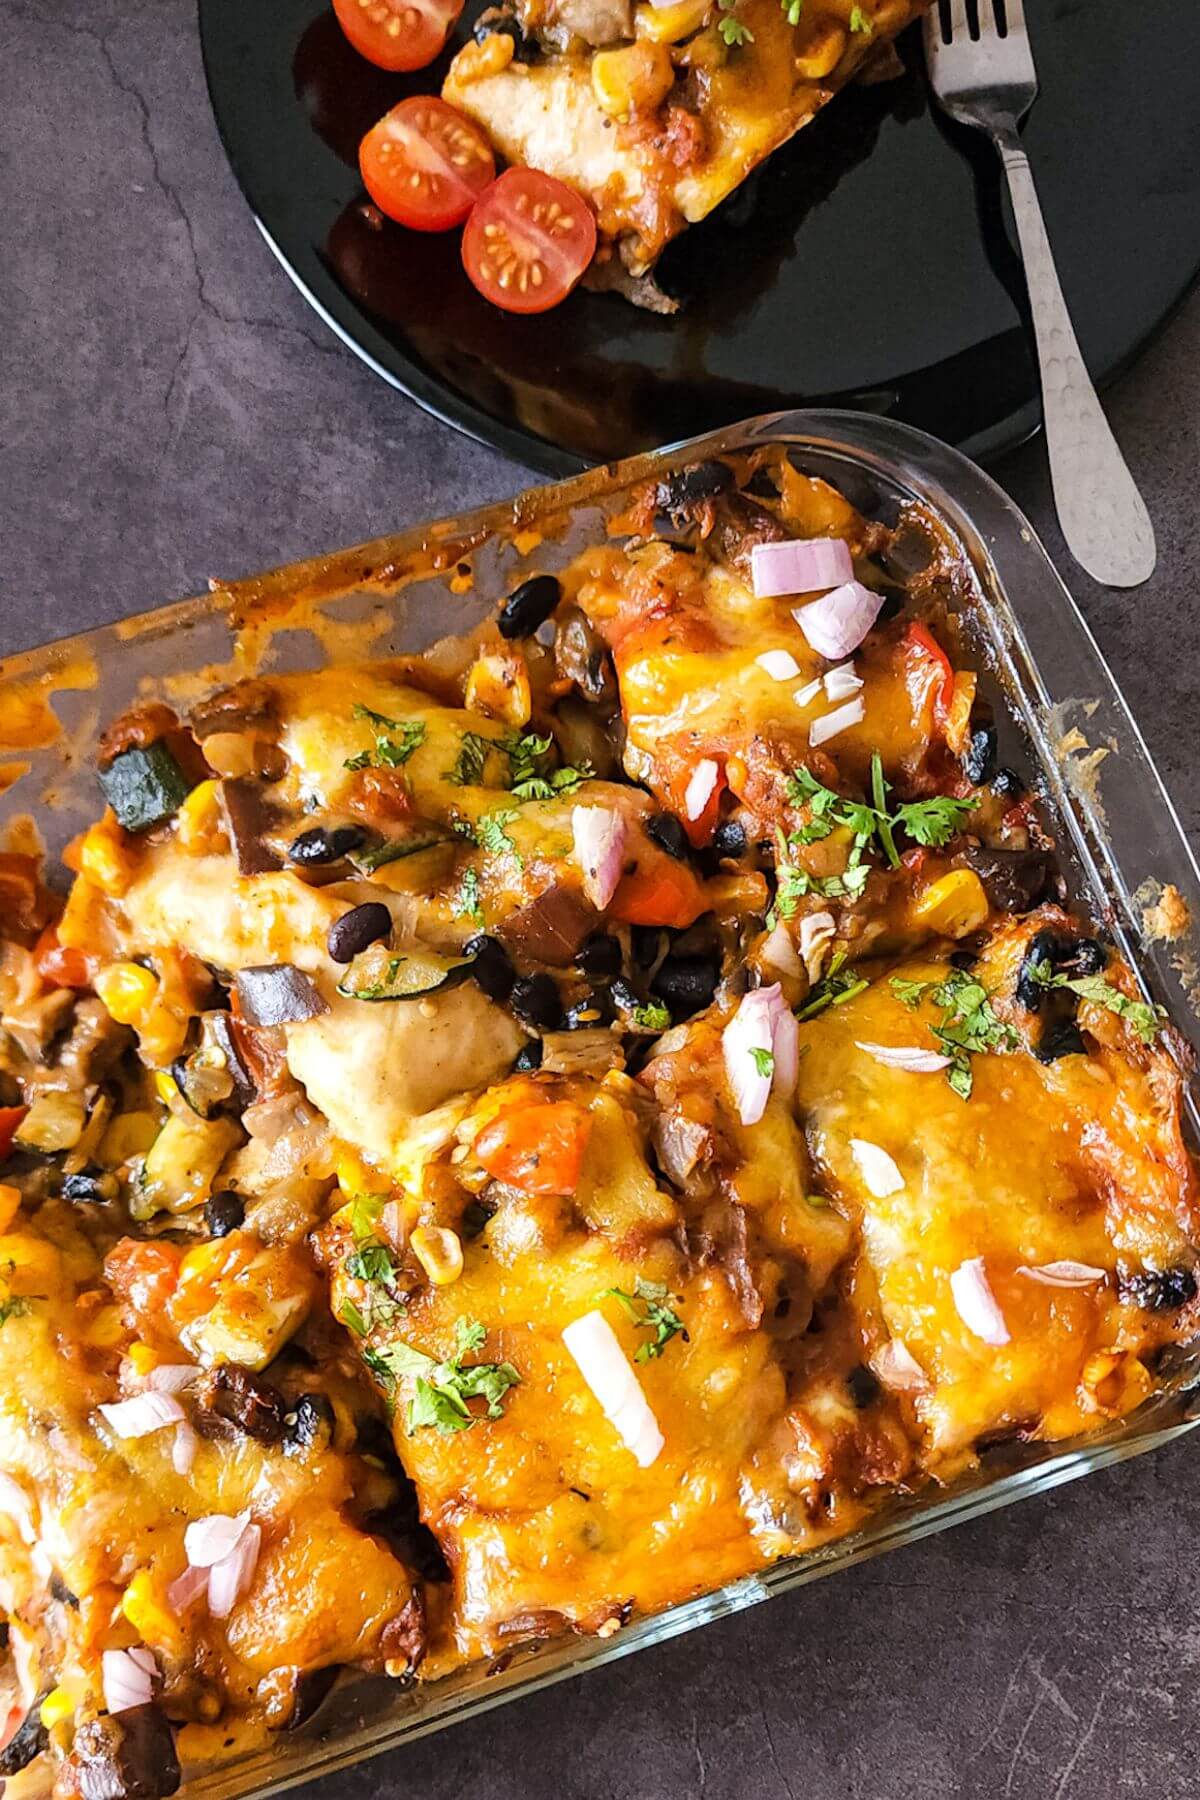 Vegetables enchilada casserole in a glass dish and more in a plate.